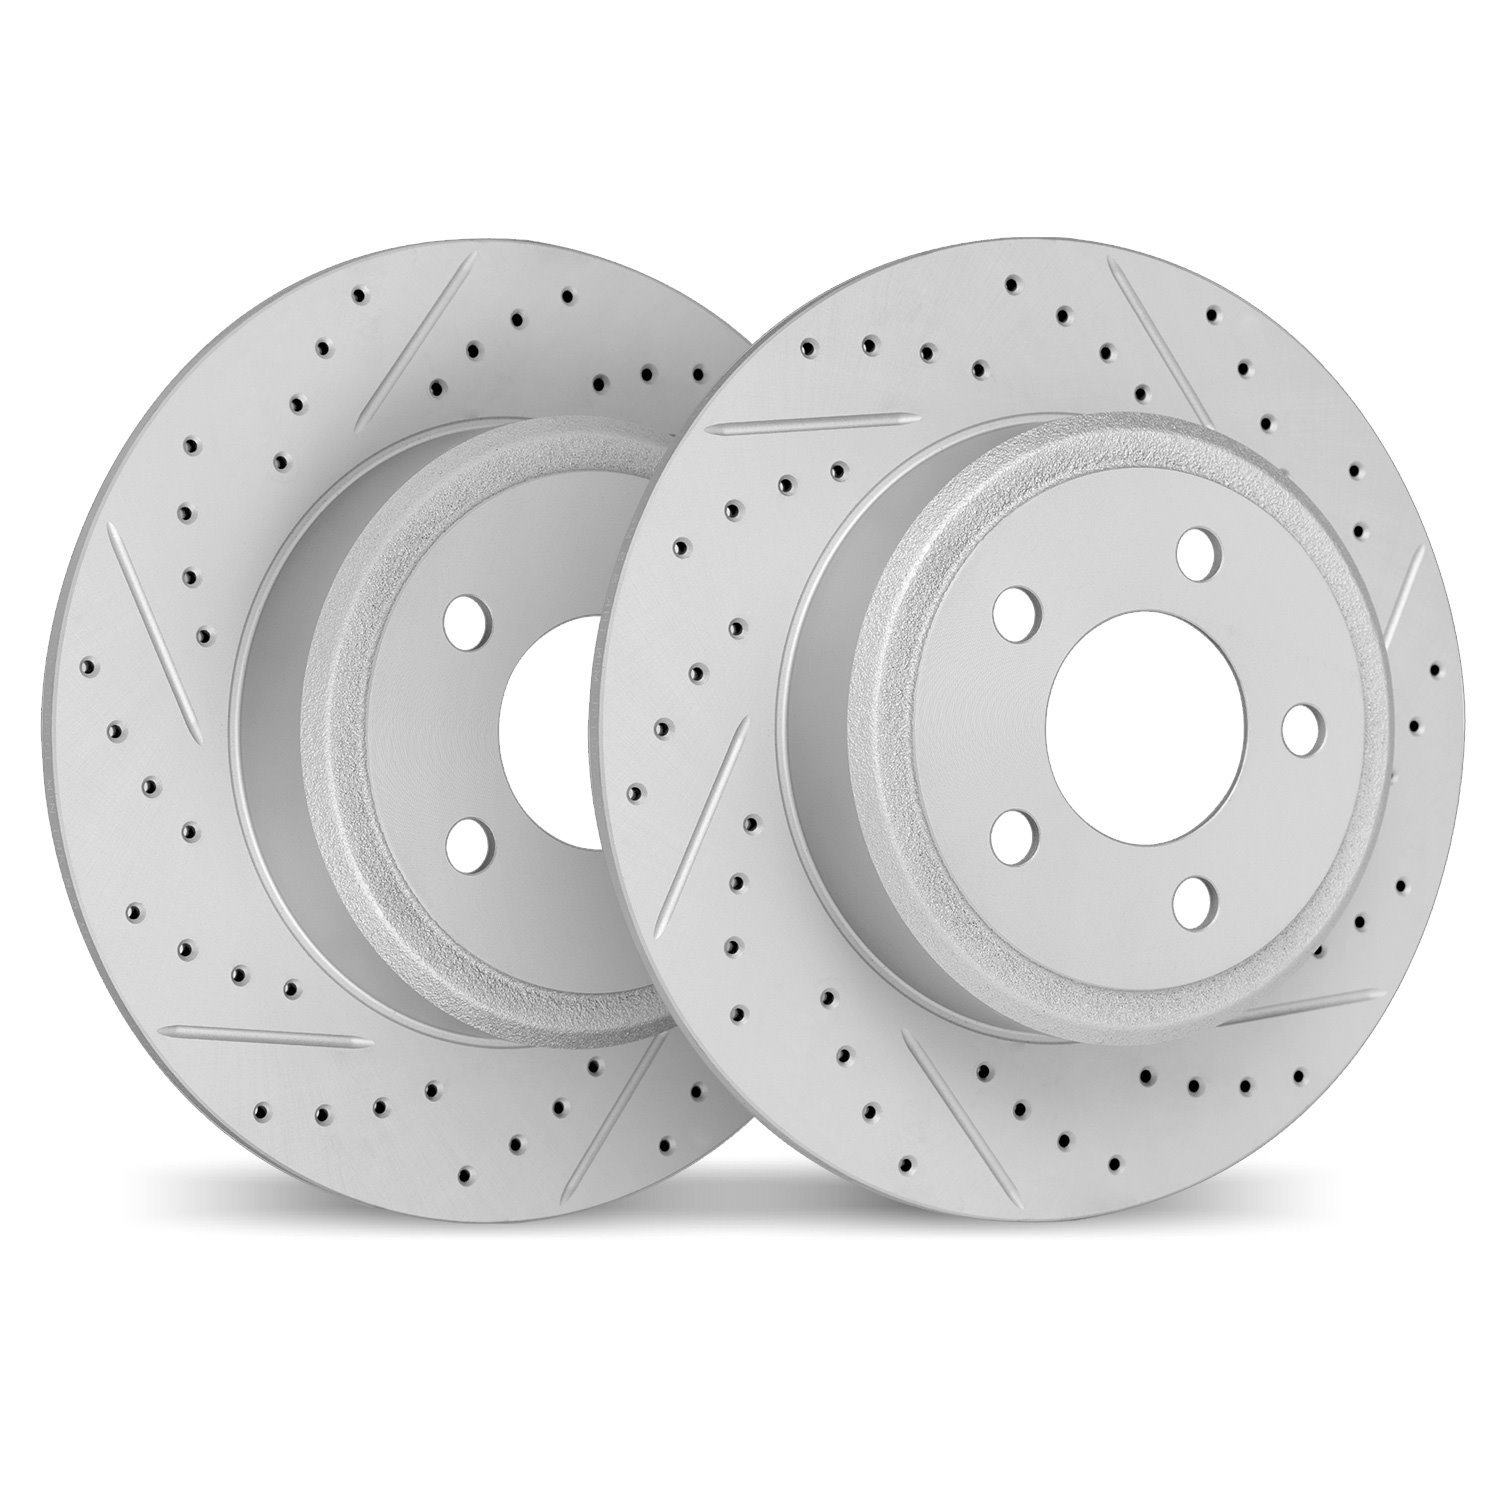 2002-63053 Geoperformance Drilled/Slotted Brake Rotors, Fits Select Mercedes-Benz, Position: Rear